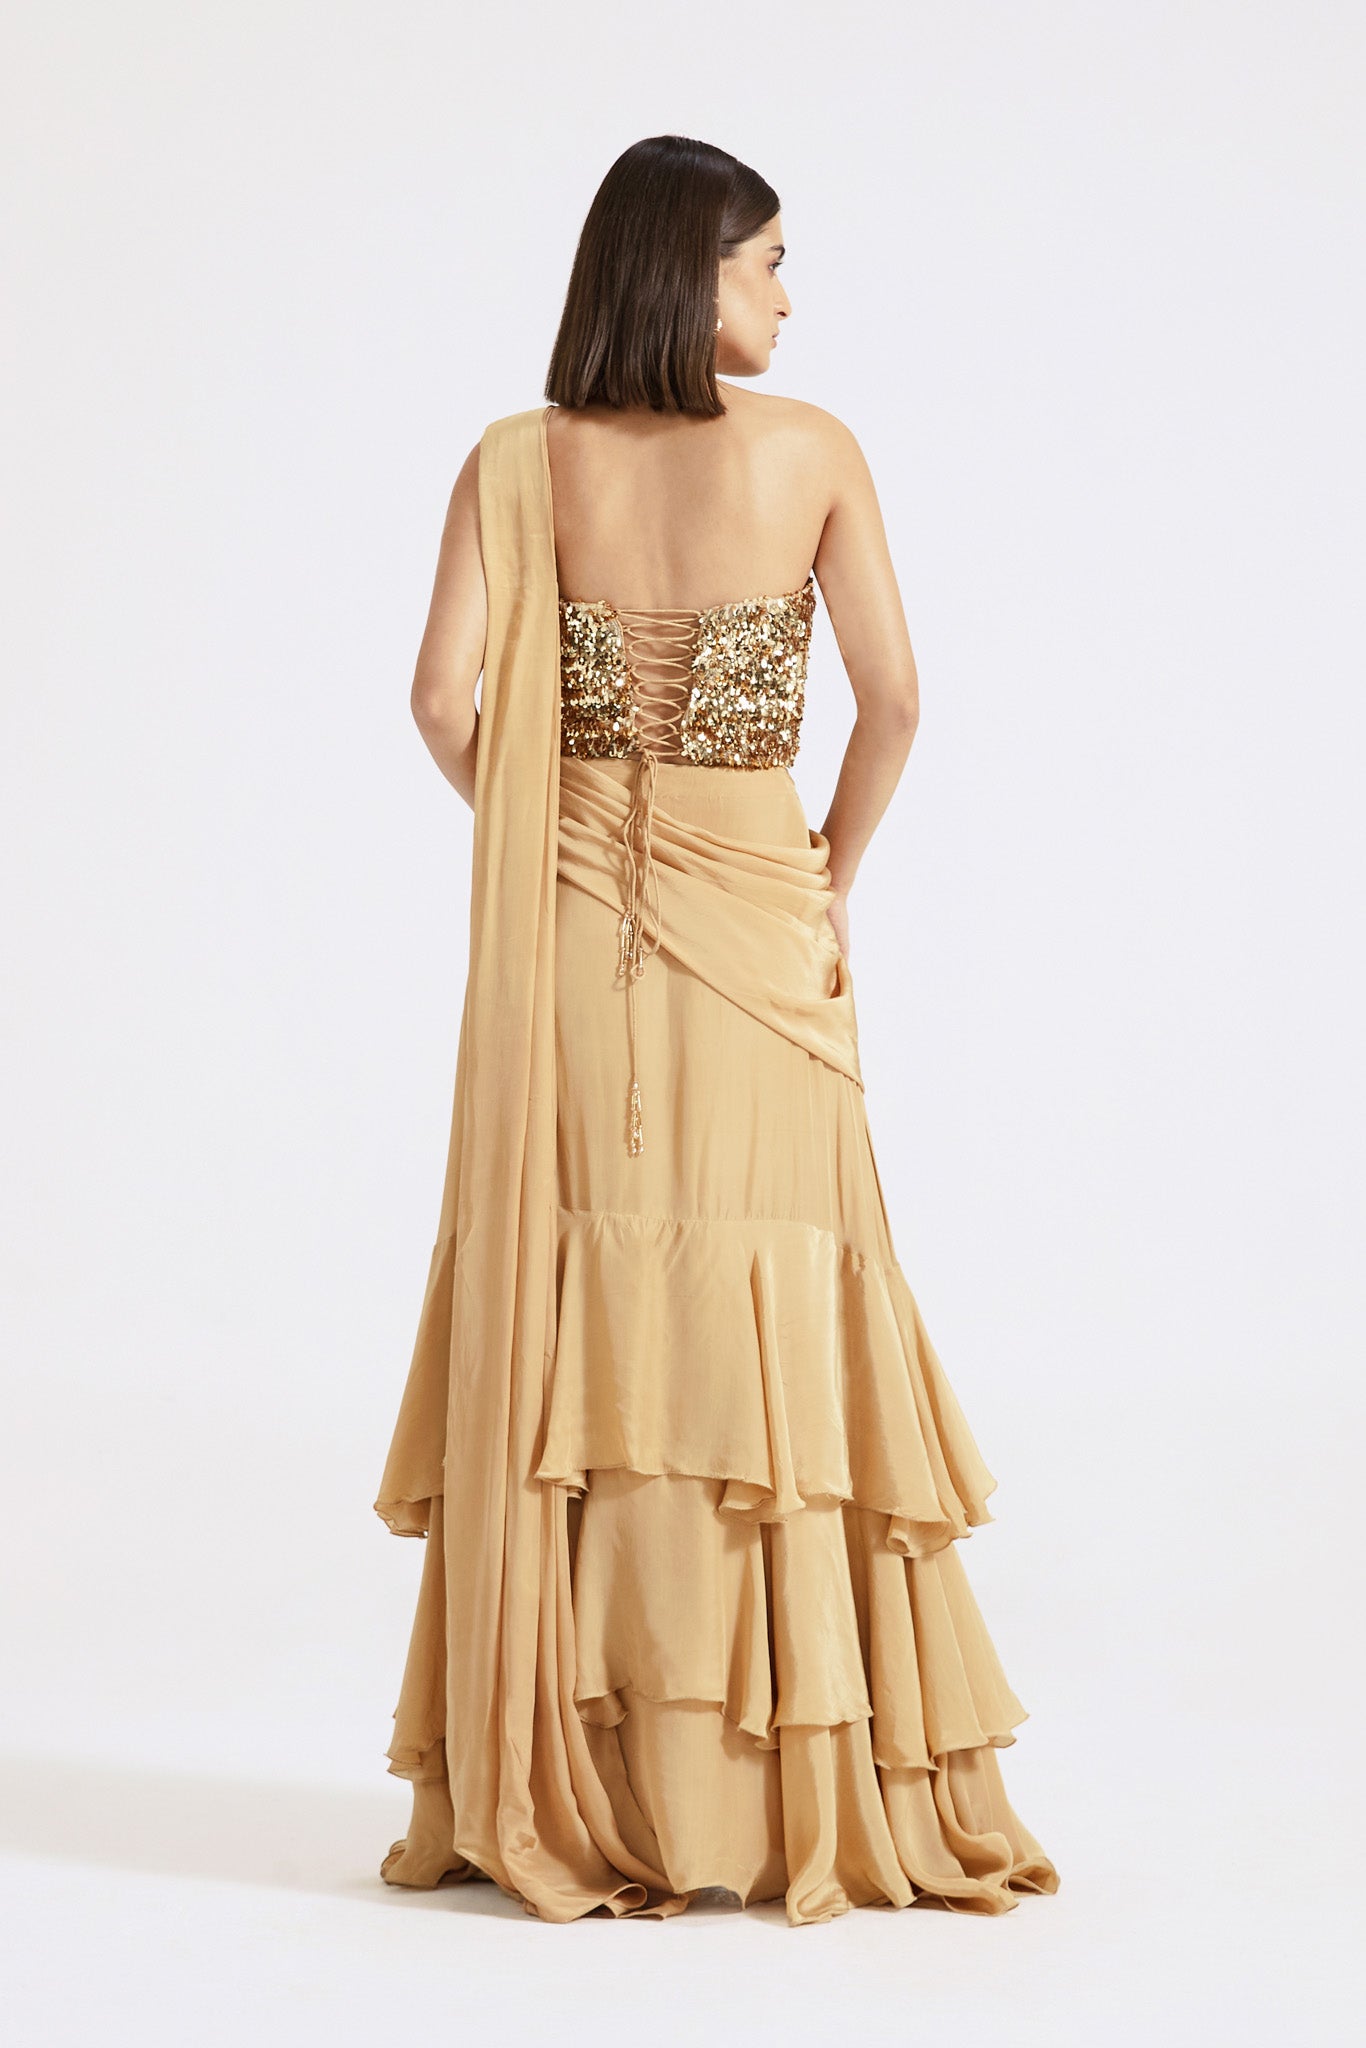 Buy gold georgette pre-draped saree online in USA with sequin blouse. Look your best at parties and weddings in beautiful designer sarees, embroidered sarees, handwoven sarees, silk sarees, organza saris from Pure Elegance Indian saree store in USA.-back